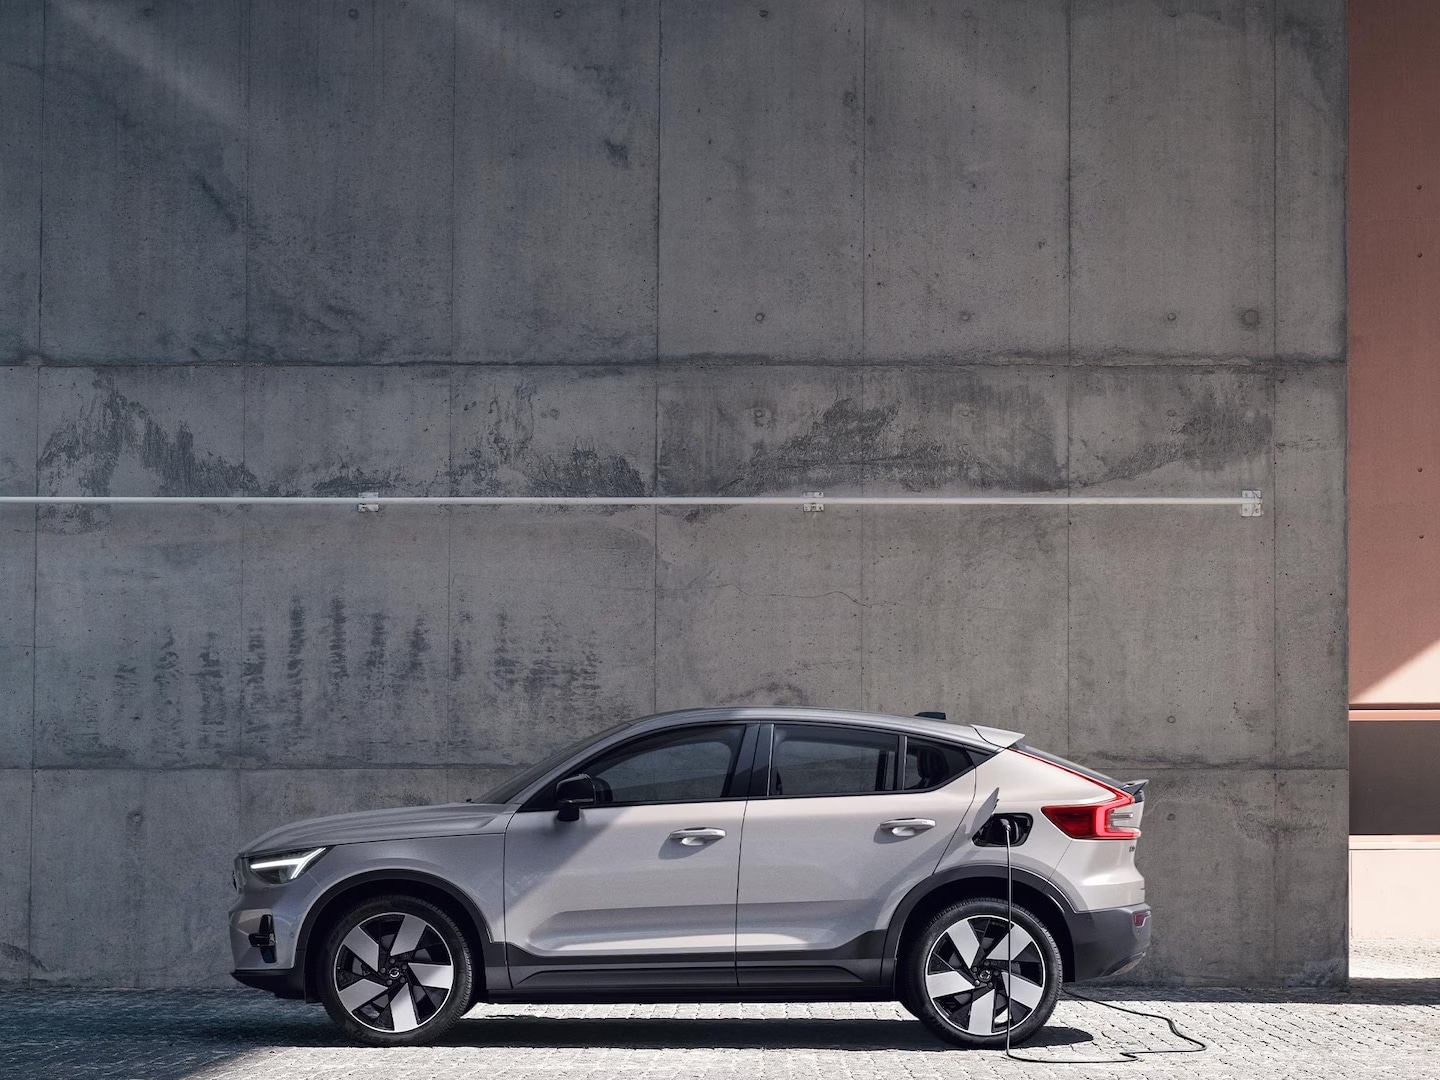 Volvo C40 Recharge exterior design with Silver Dawn color.